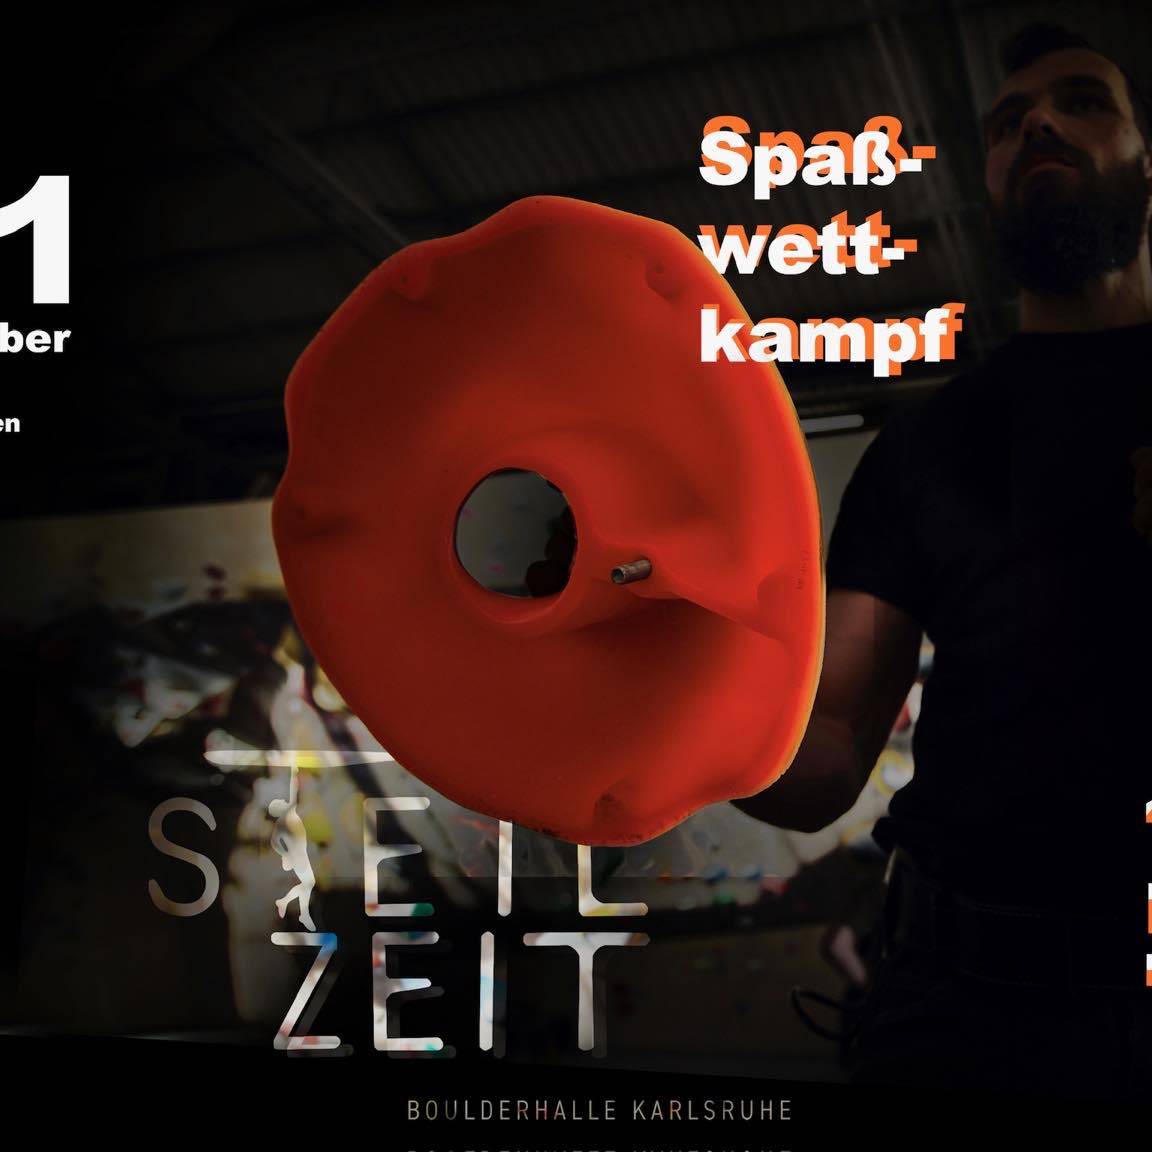 Advertisement for the Event Steilzeit at Boulderhalle Steil in Karlsruhe. Date 21.10. starting at 5 pm. 40 new boulders and a party afterwards.